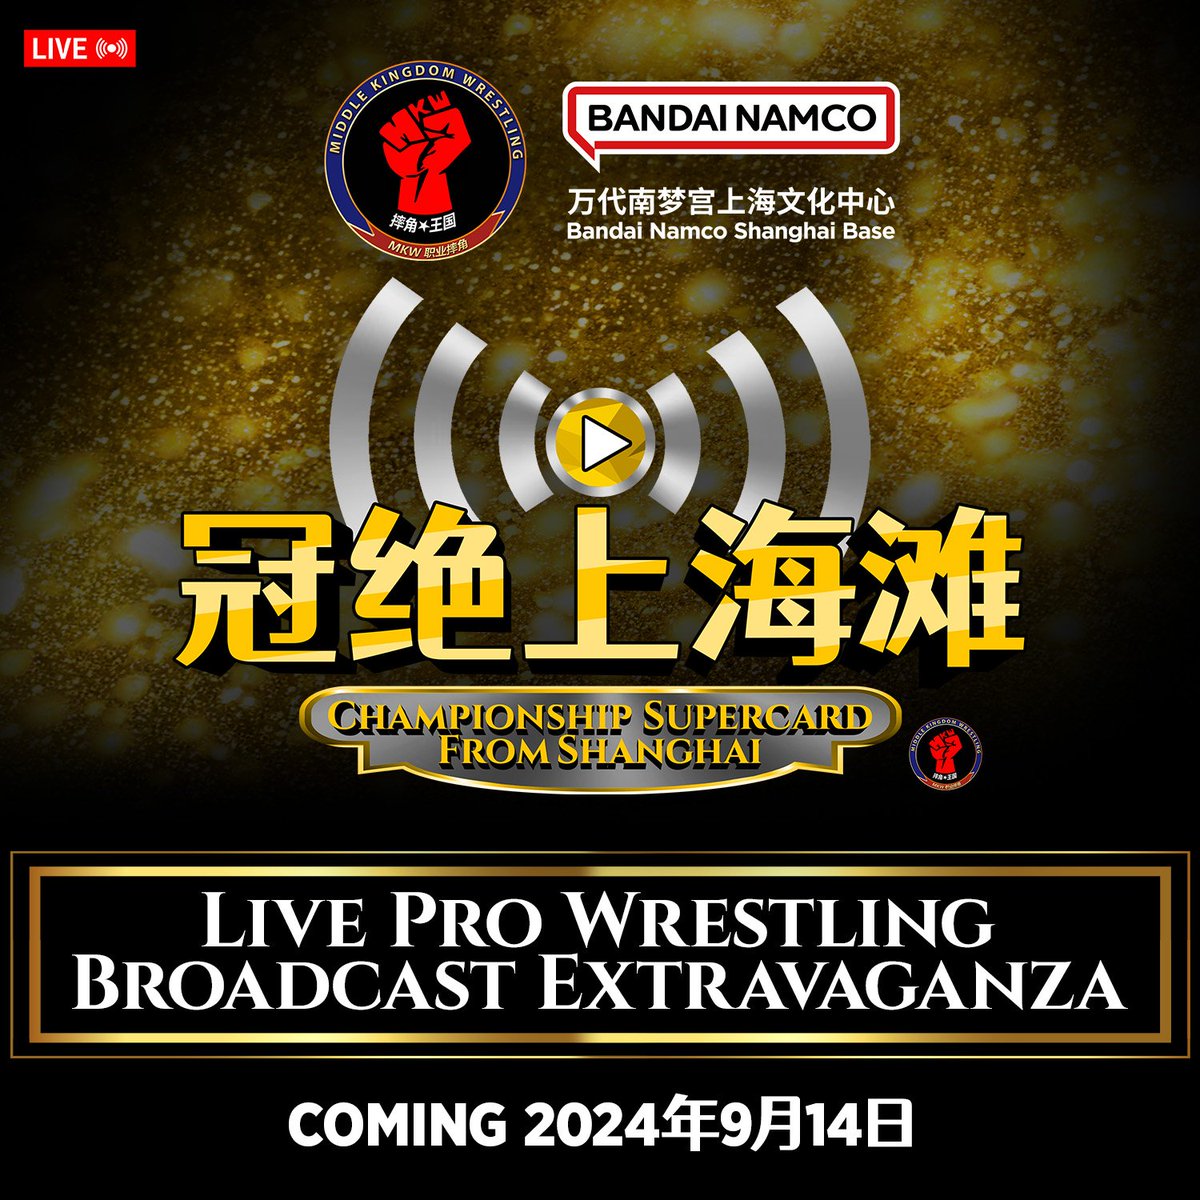 This year's MKW Championship Supercard from Shanghai' event on September 14, 2024, will be nationally broadcast live, on several broadcasting platforms from the iconic premises at Bandai Namco Shanghai Base, a key partner in this event!